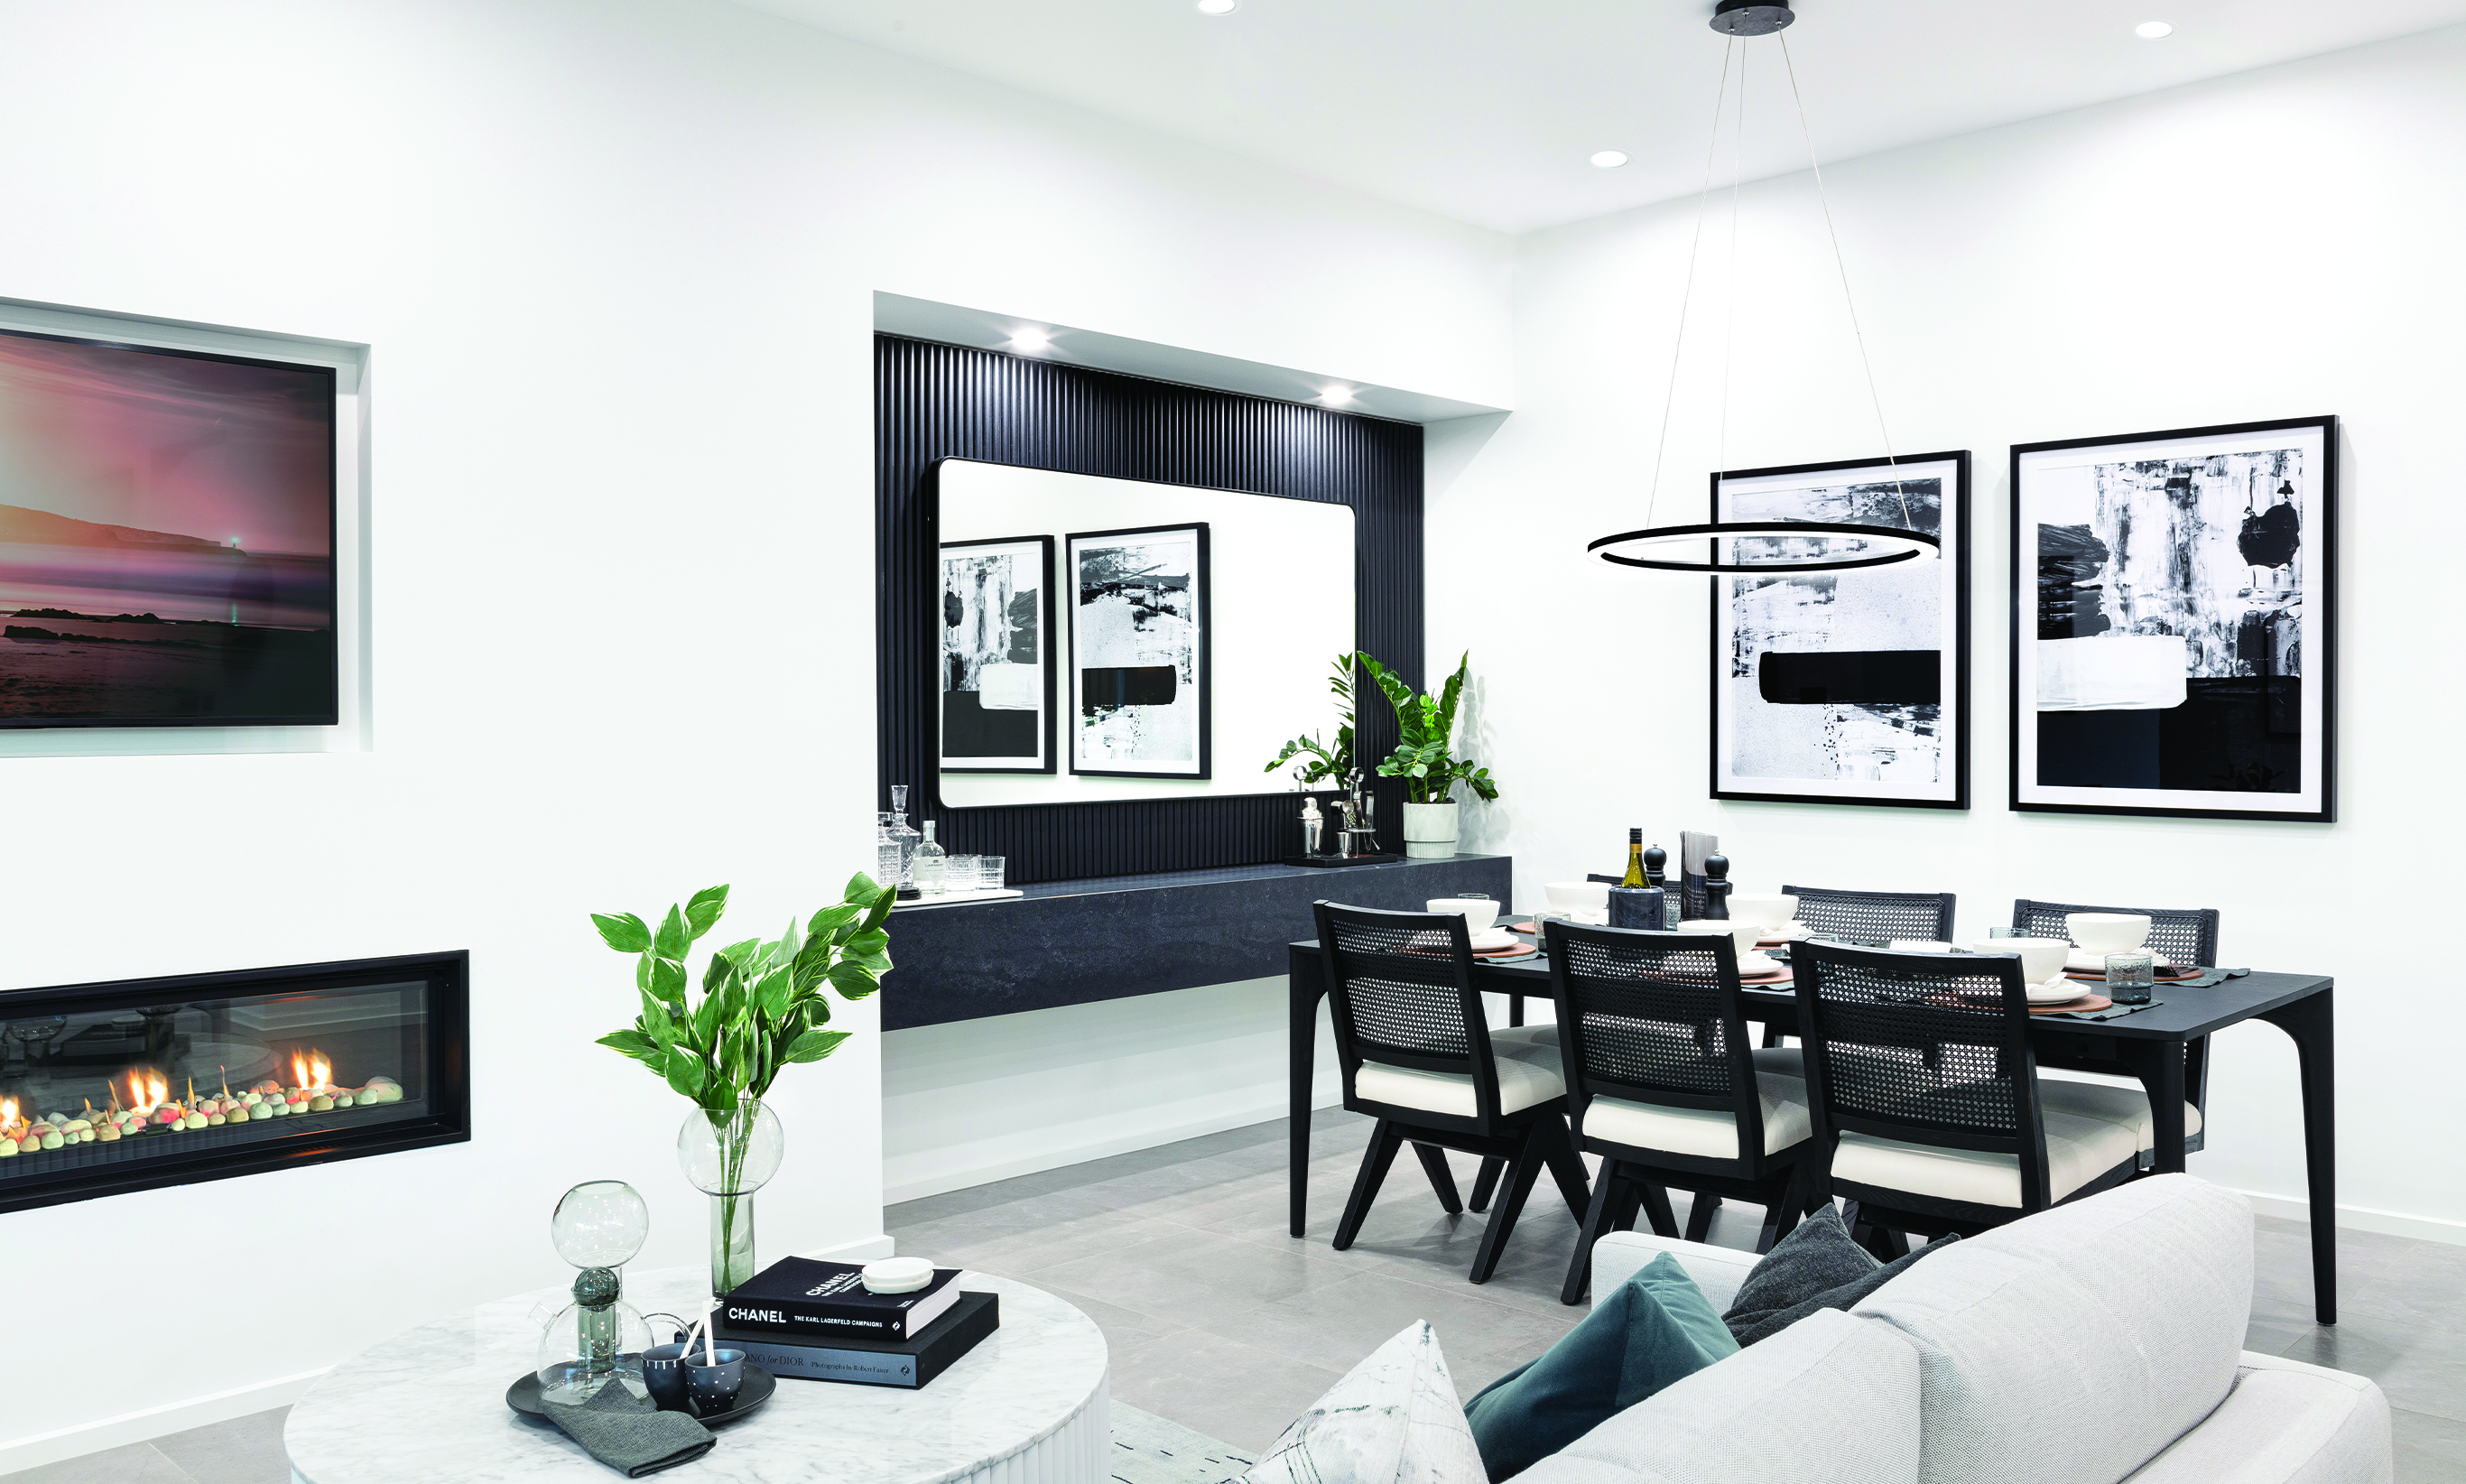 Contempo Modern styling creates a chic dining and living space with dramatic feature lighting, uncluttered surfaces with modern furtiture design against the monochrome palette.